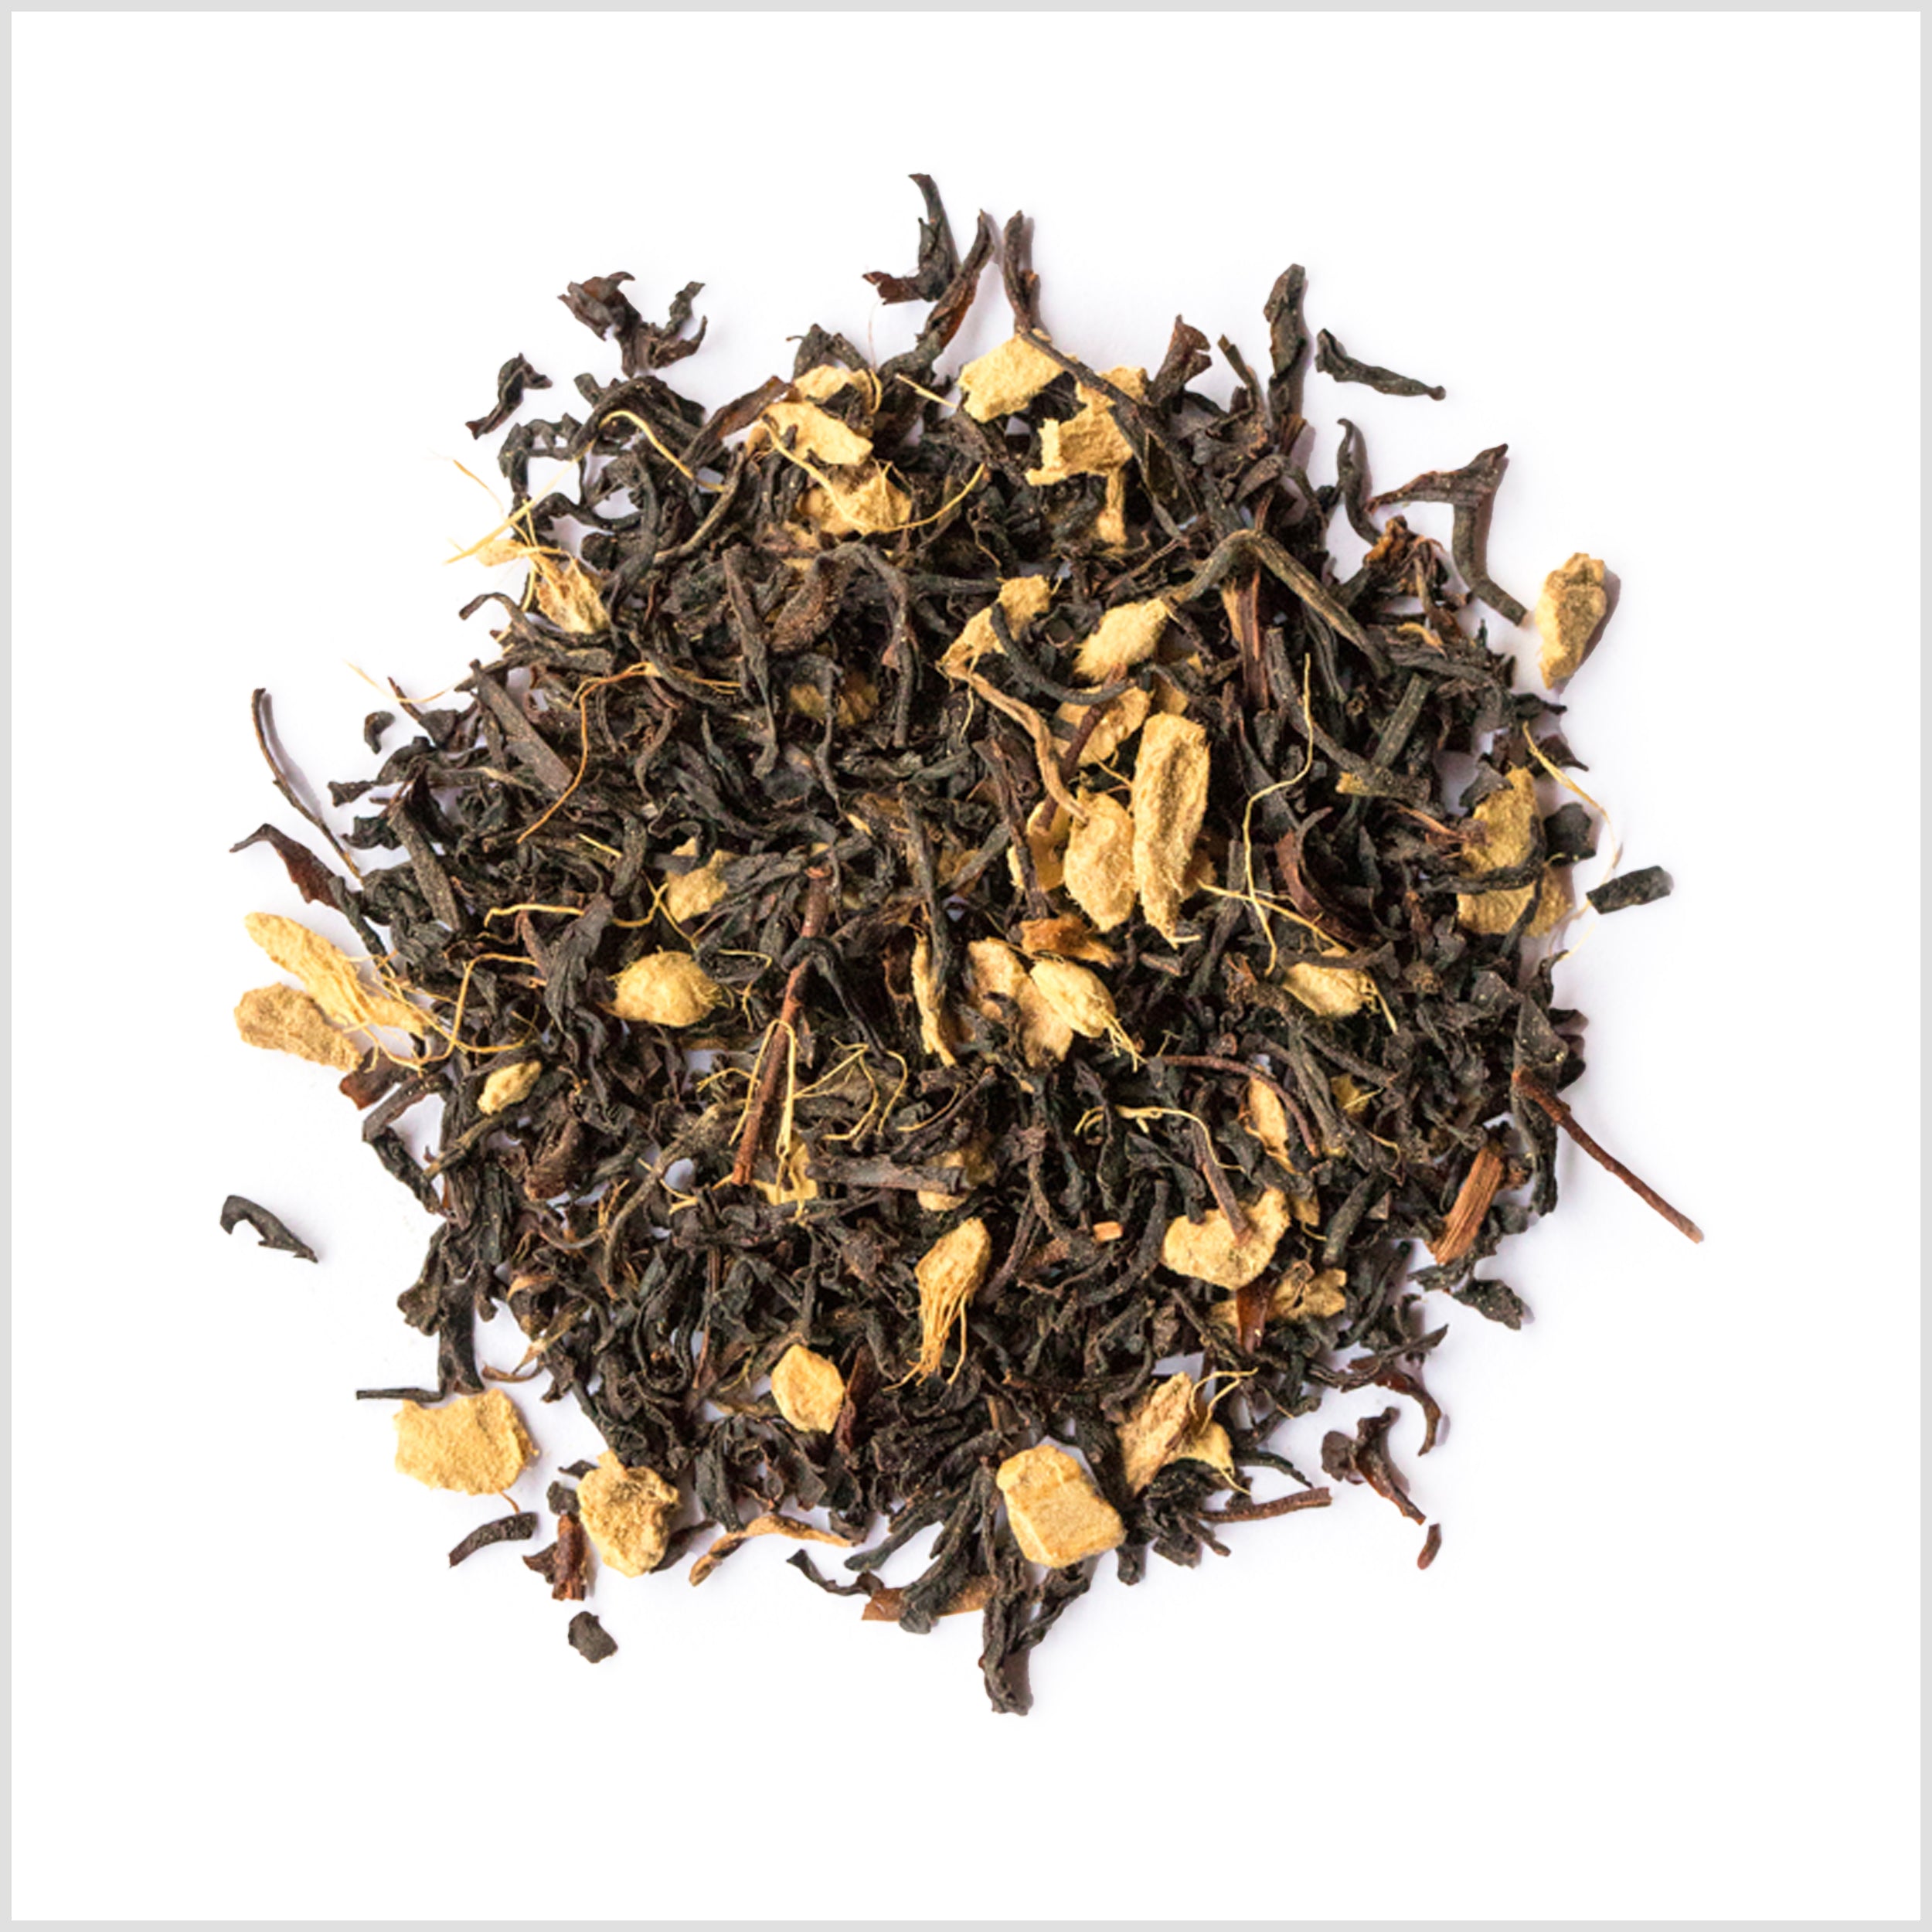 Circular pile of full leaf black tea with ginger pieces.